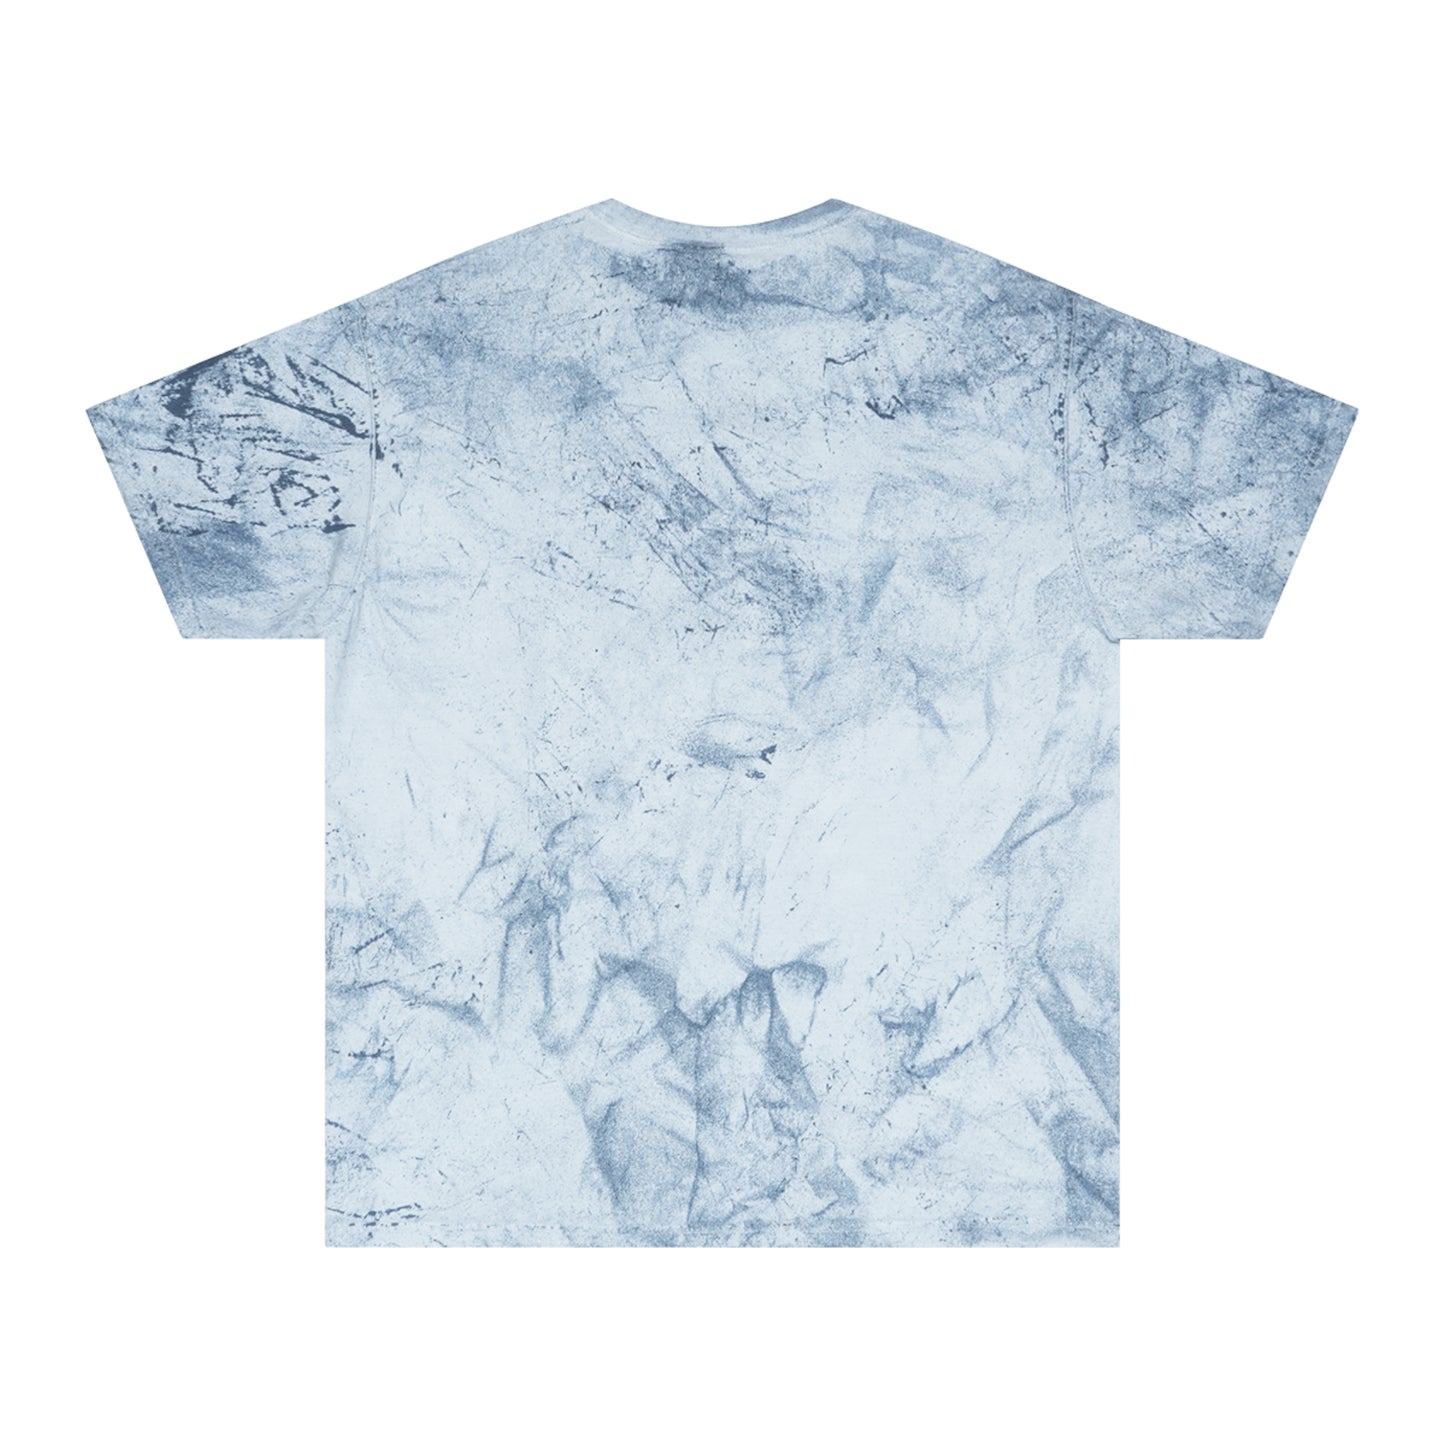 Your Ancestors Prayed For You Tie Dye Tee